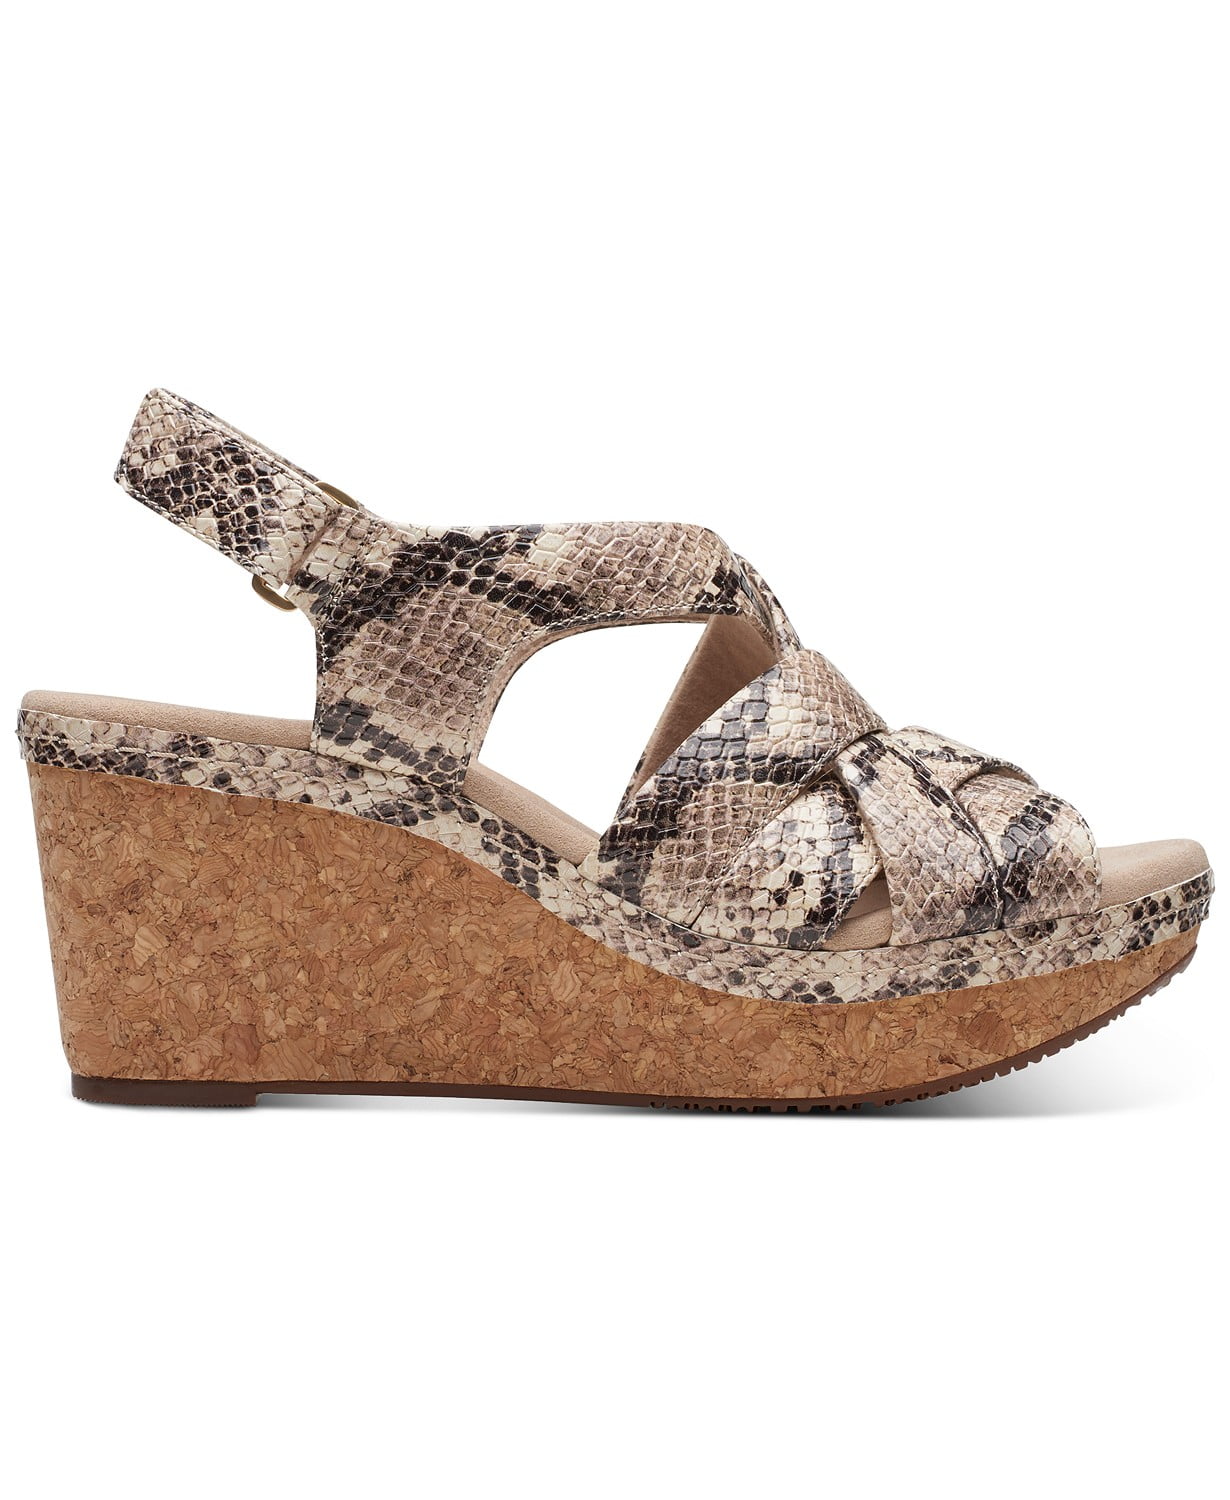 woocommerce-673321-2209615.cloudwaysapps.com-clarks-collection-womens-annadel-rayna-wedge-sandals